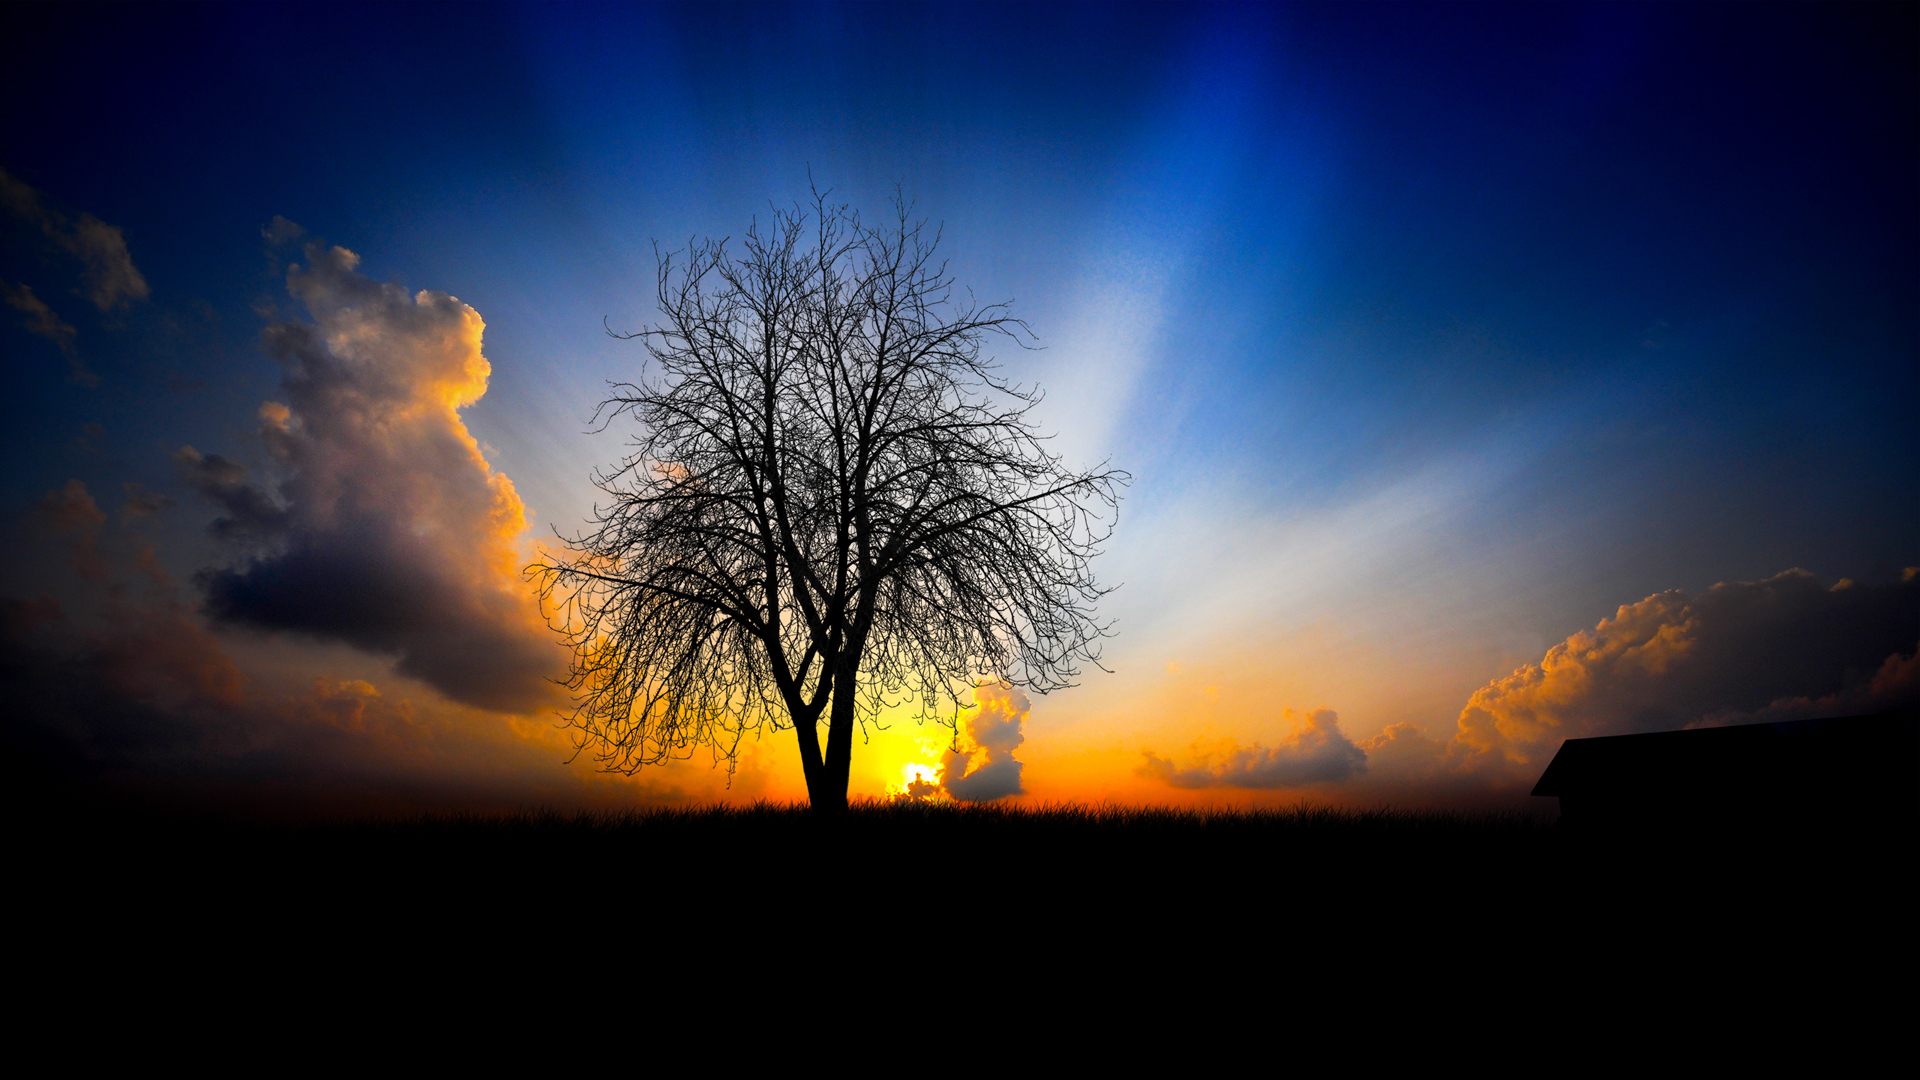 Beauty Awesome Tree Full HD 1080p Wallpaper